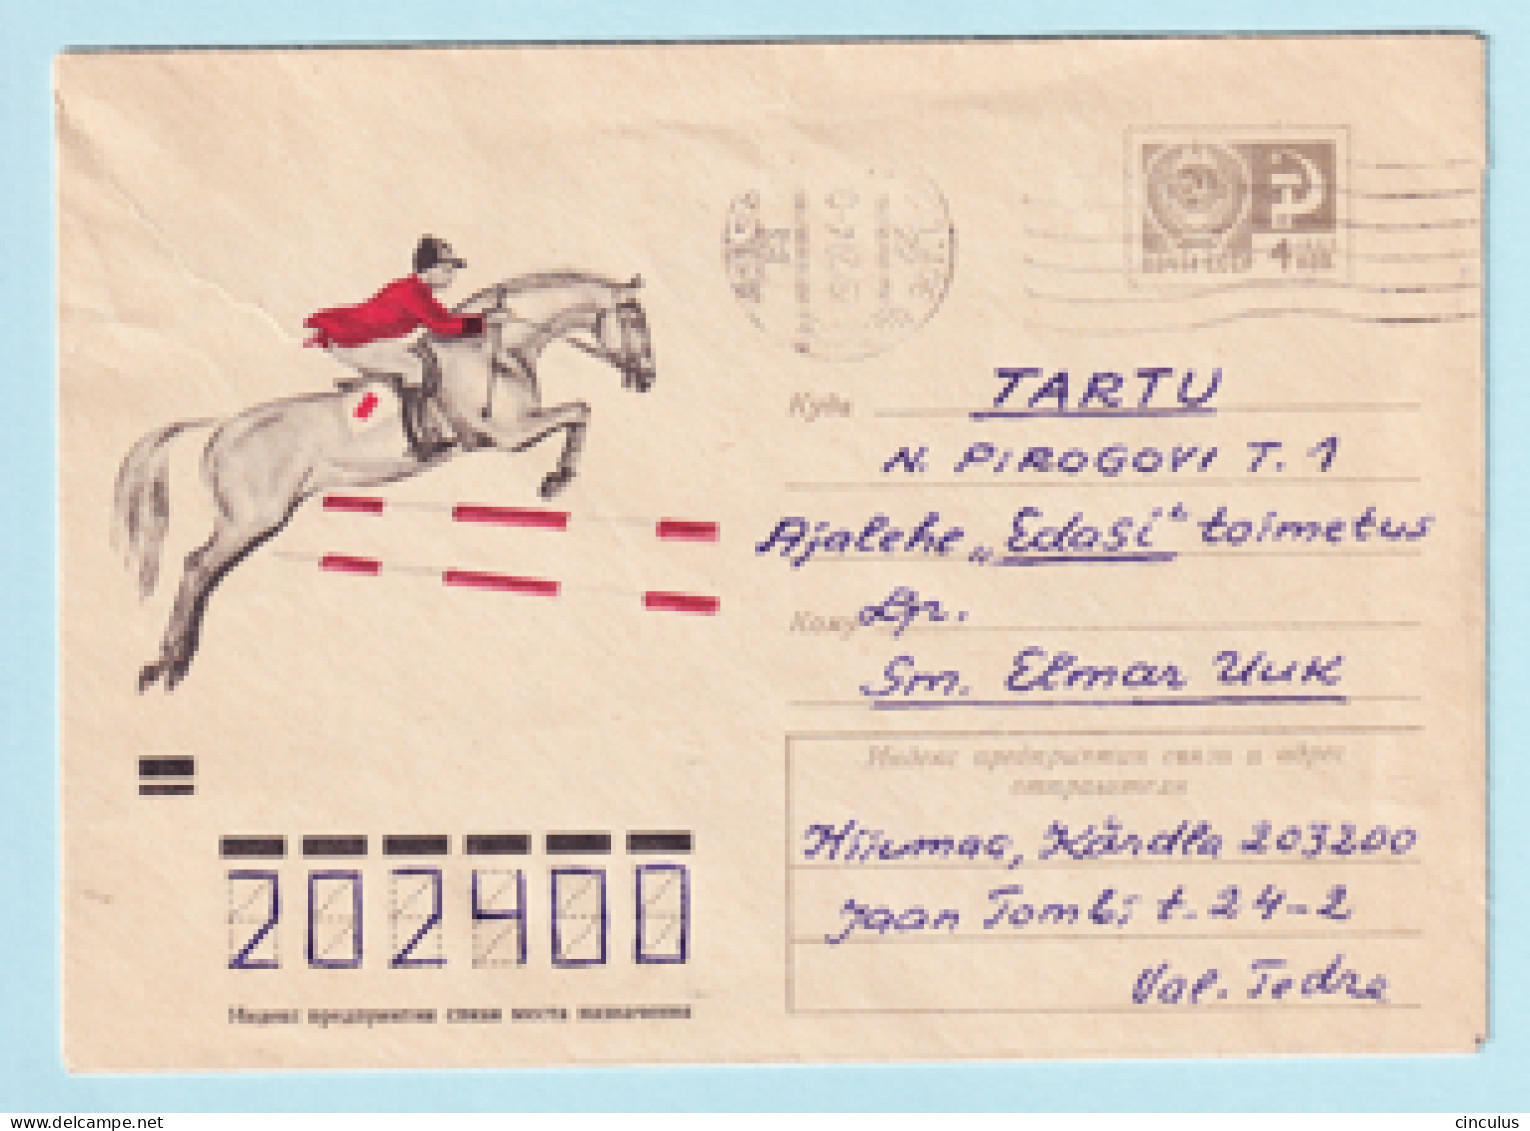 USSR 1972.0309. Equestrian Sport. Prestamped Cover, Used - 1970-79